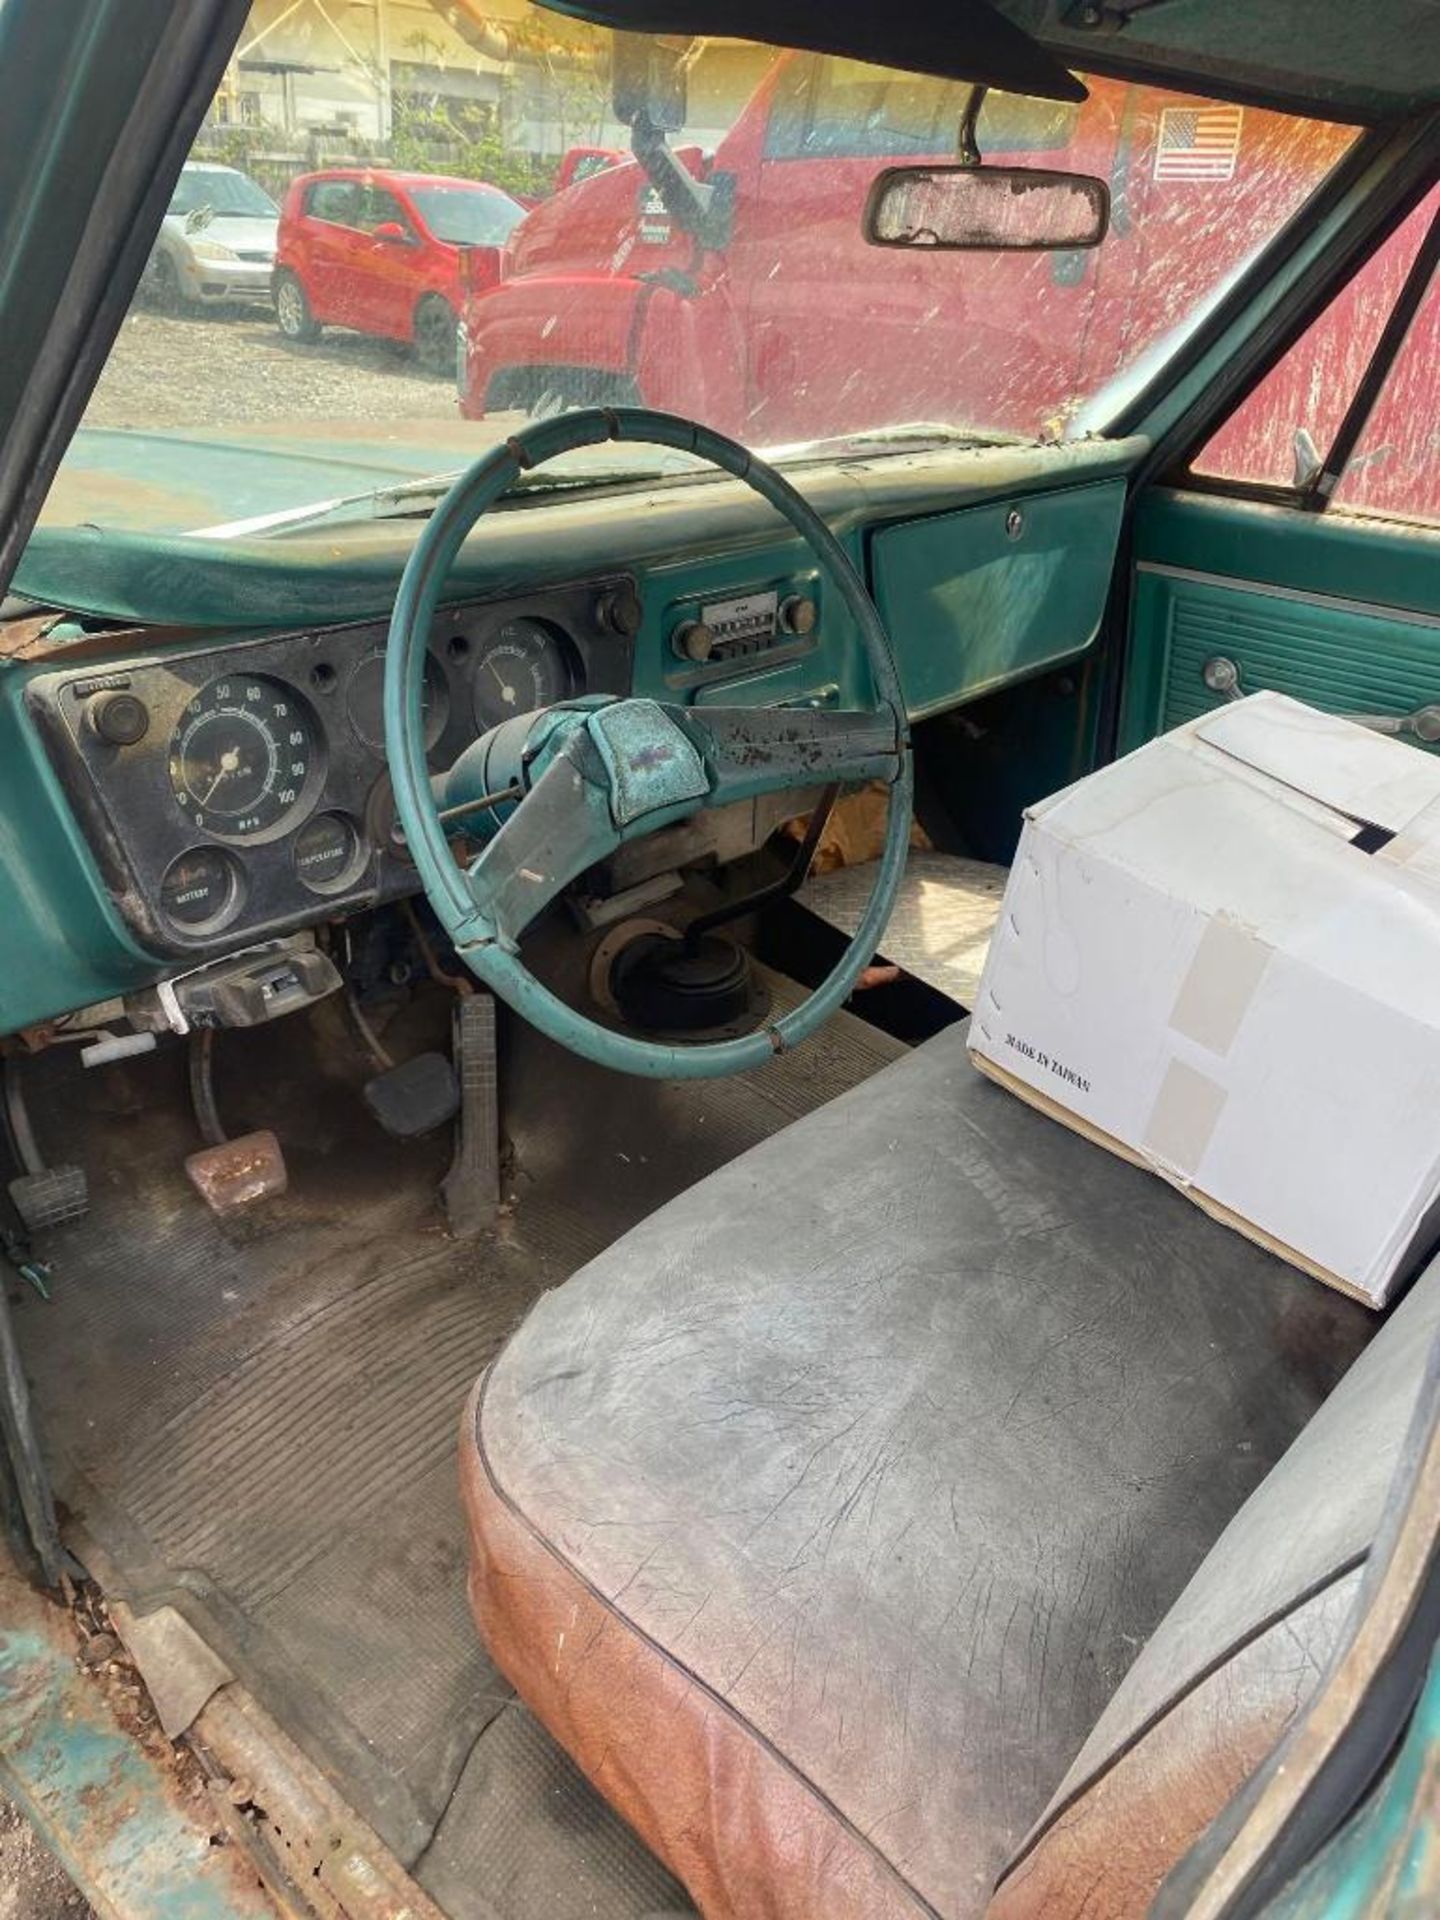 1970 C/10 Pickup Truck (for parts) - Image 4 of 10